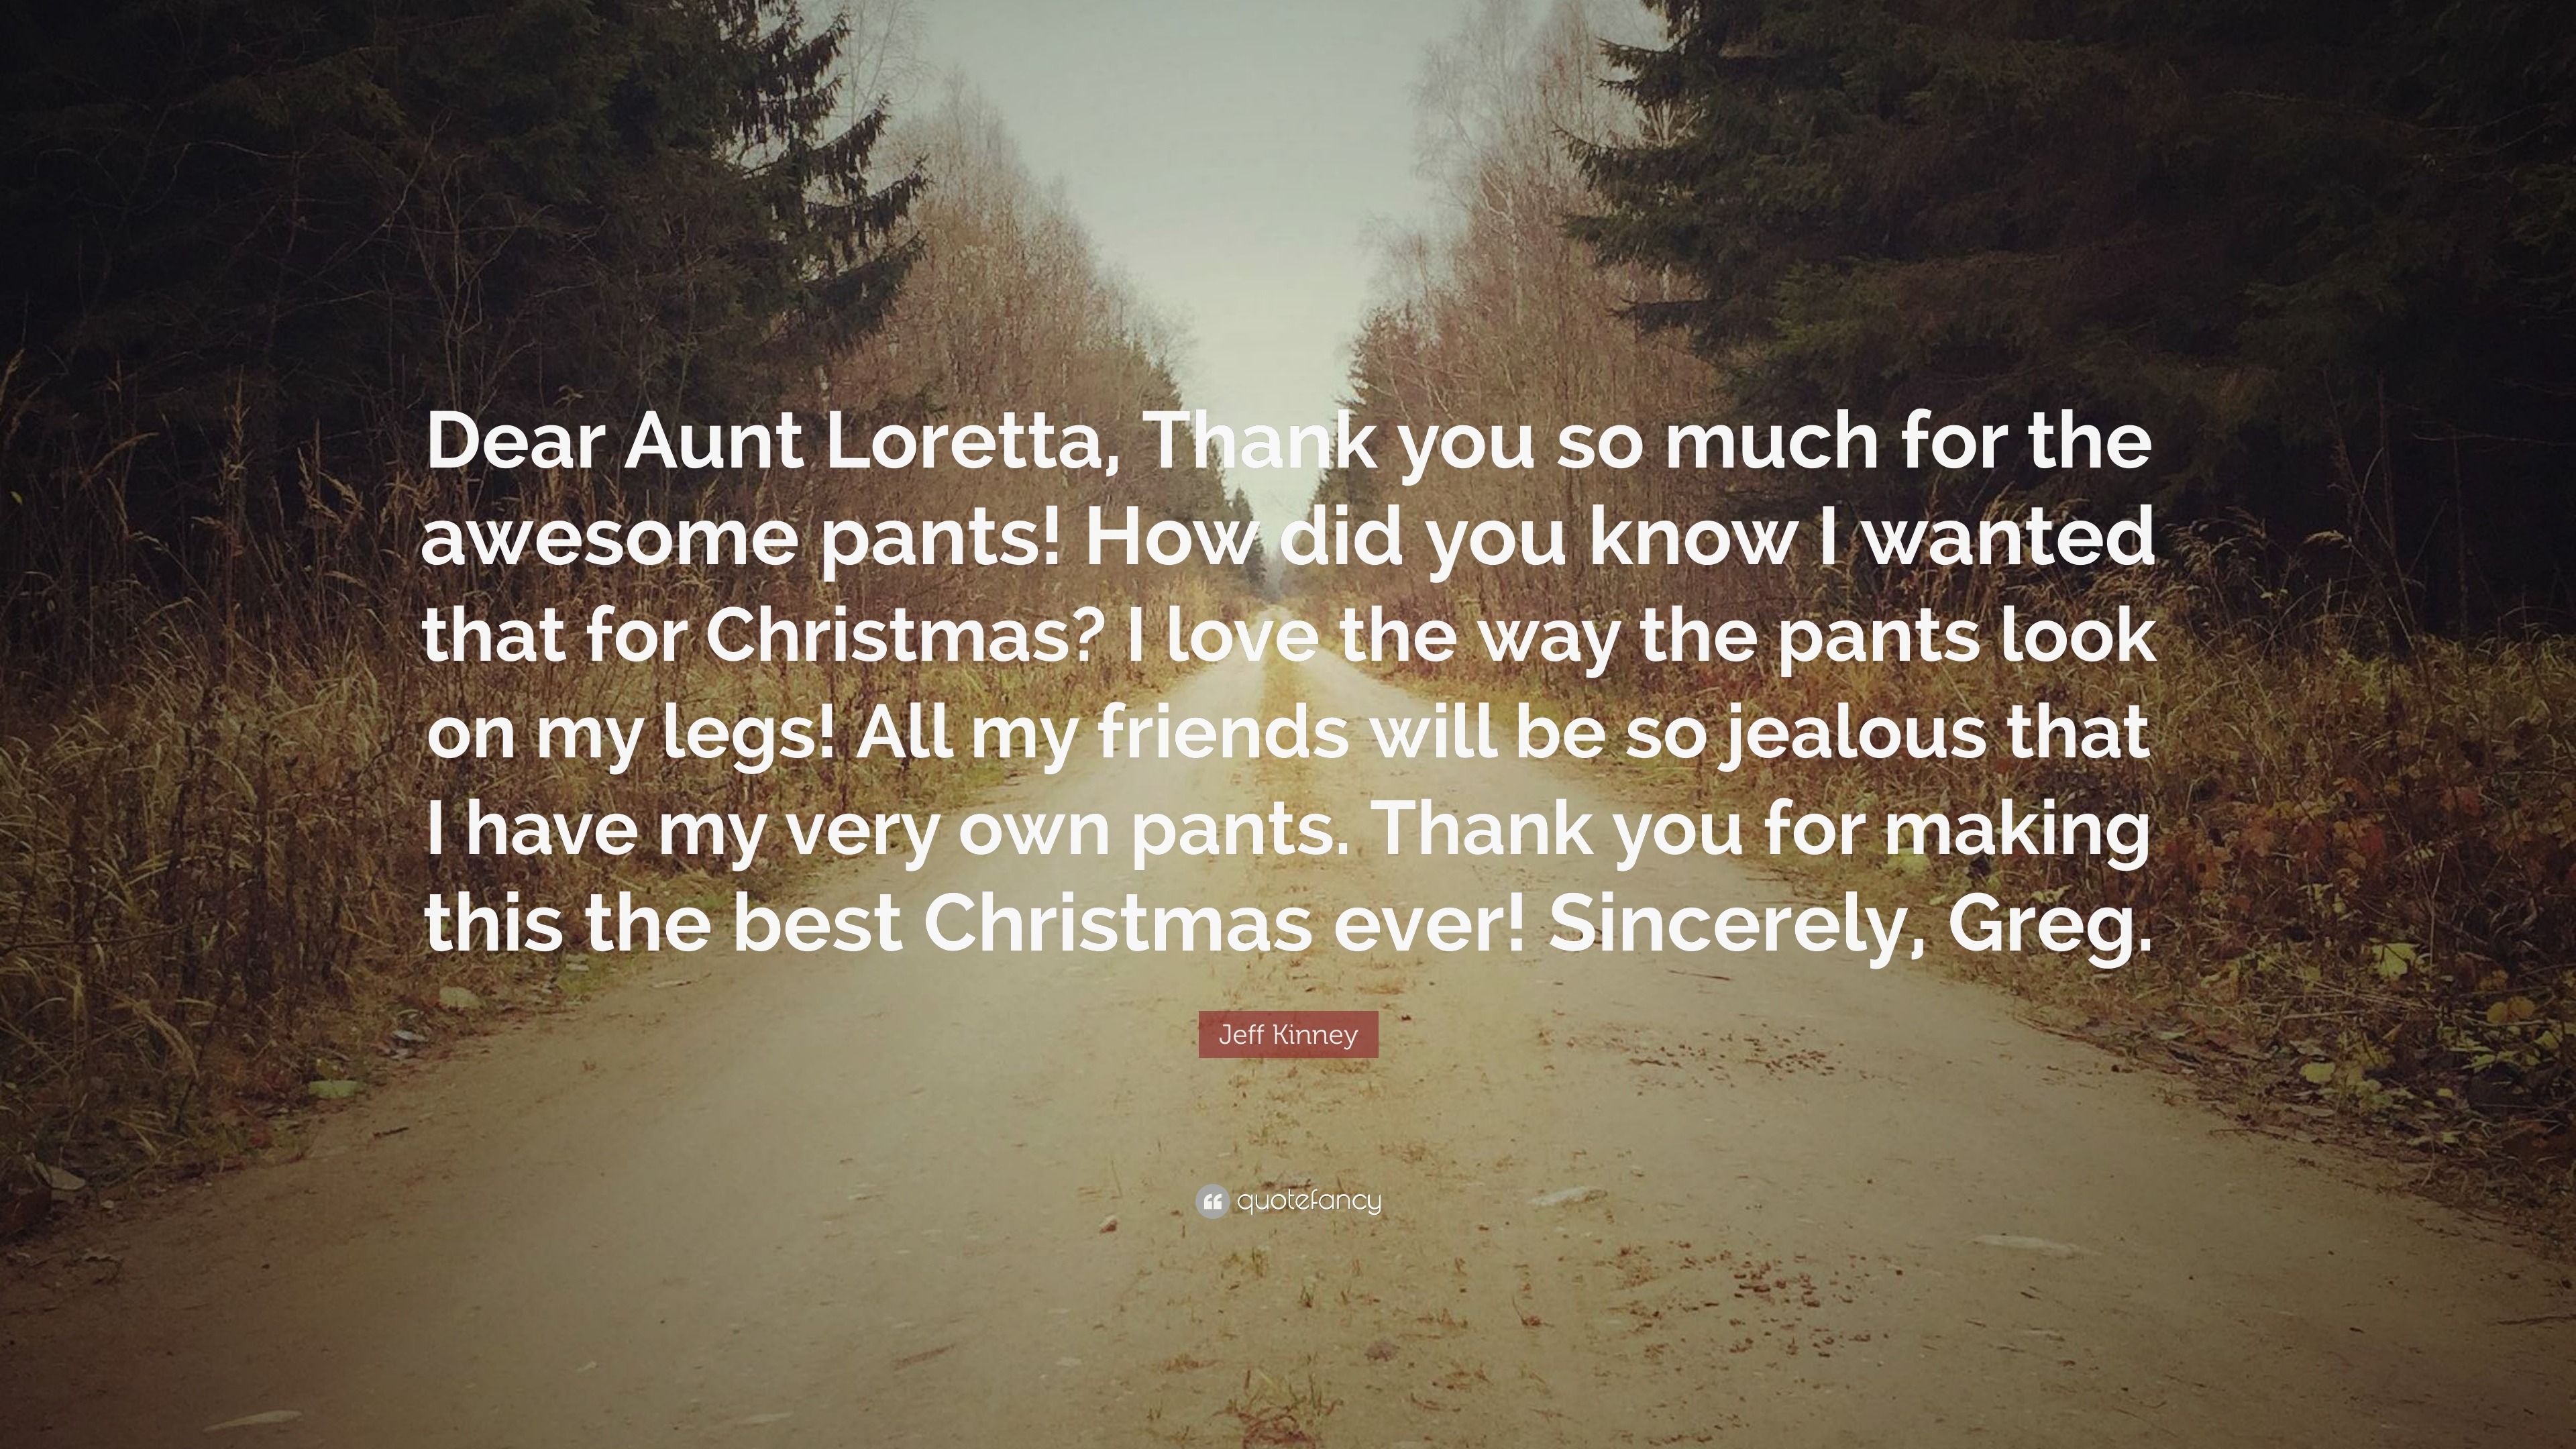 Jeff Kinney Quote “Dear Aunt Loretta Thank you so much for the awesome